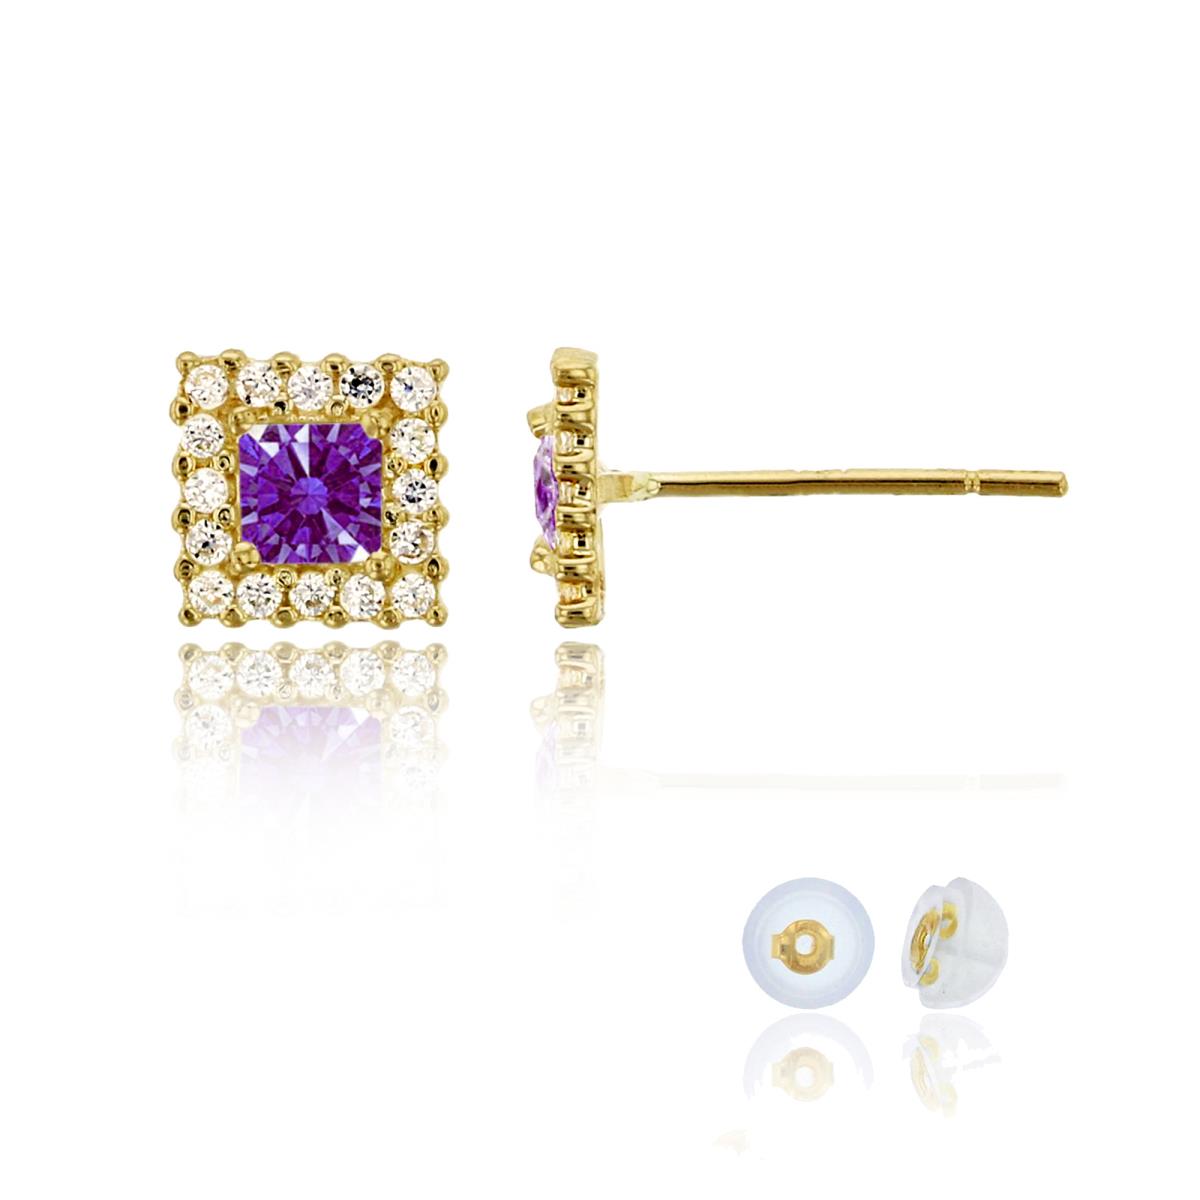 14K Yellow Gold Pave 3mm Princess Fancy Purple Swarovski Zirconia Square Stud Earring with Silicone Back